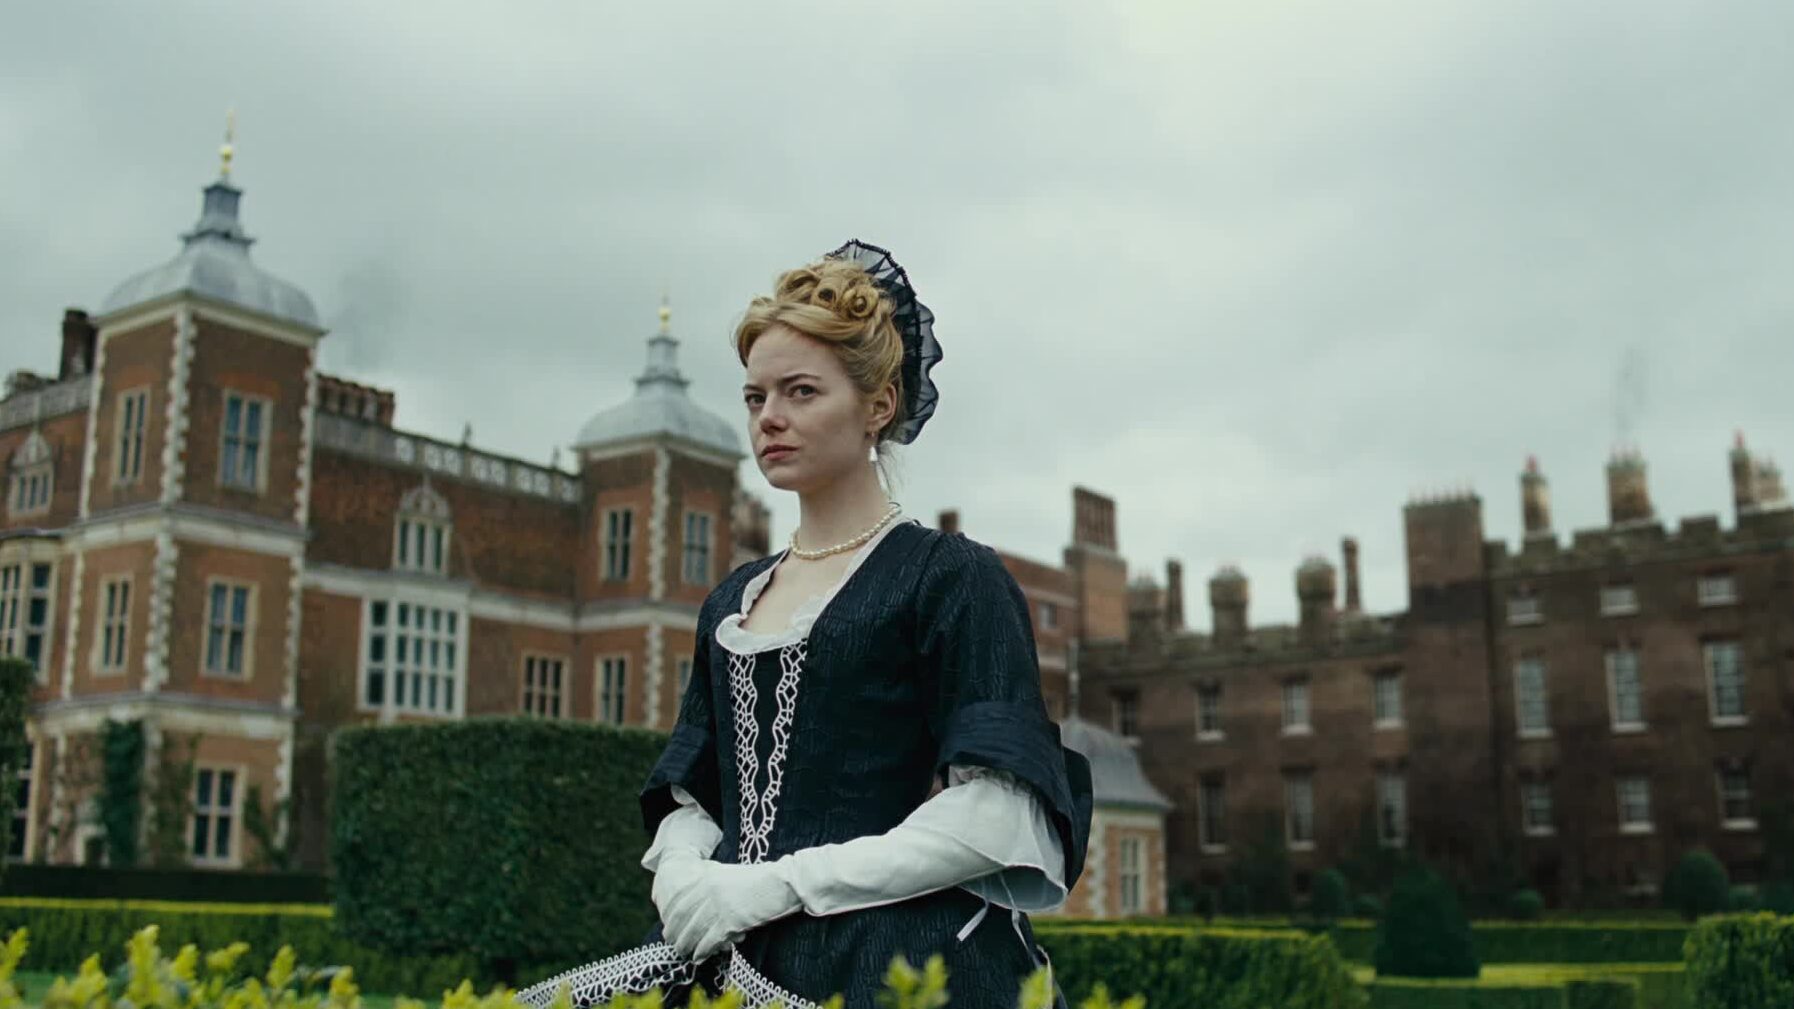 the favourite